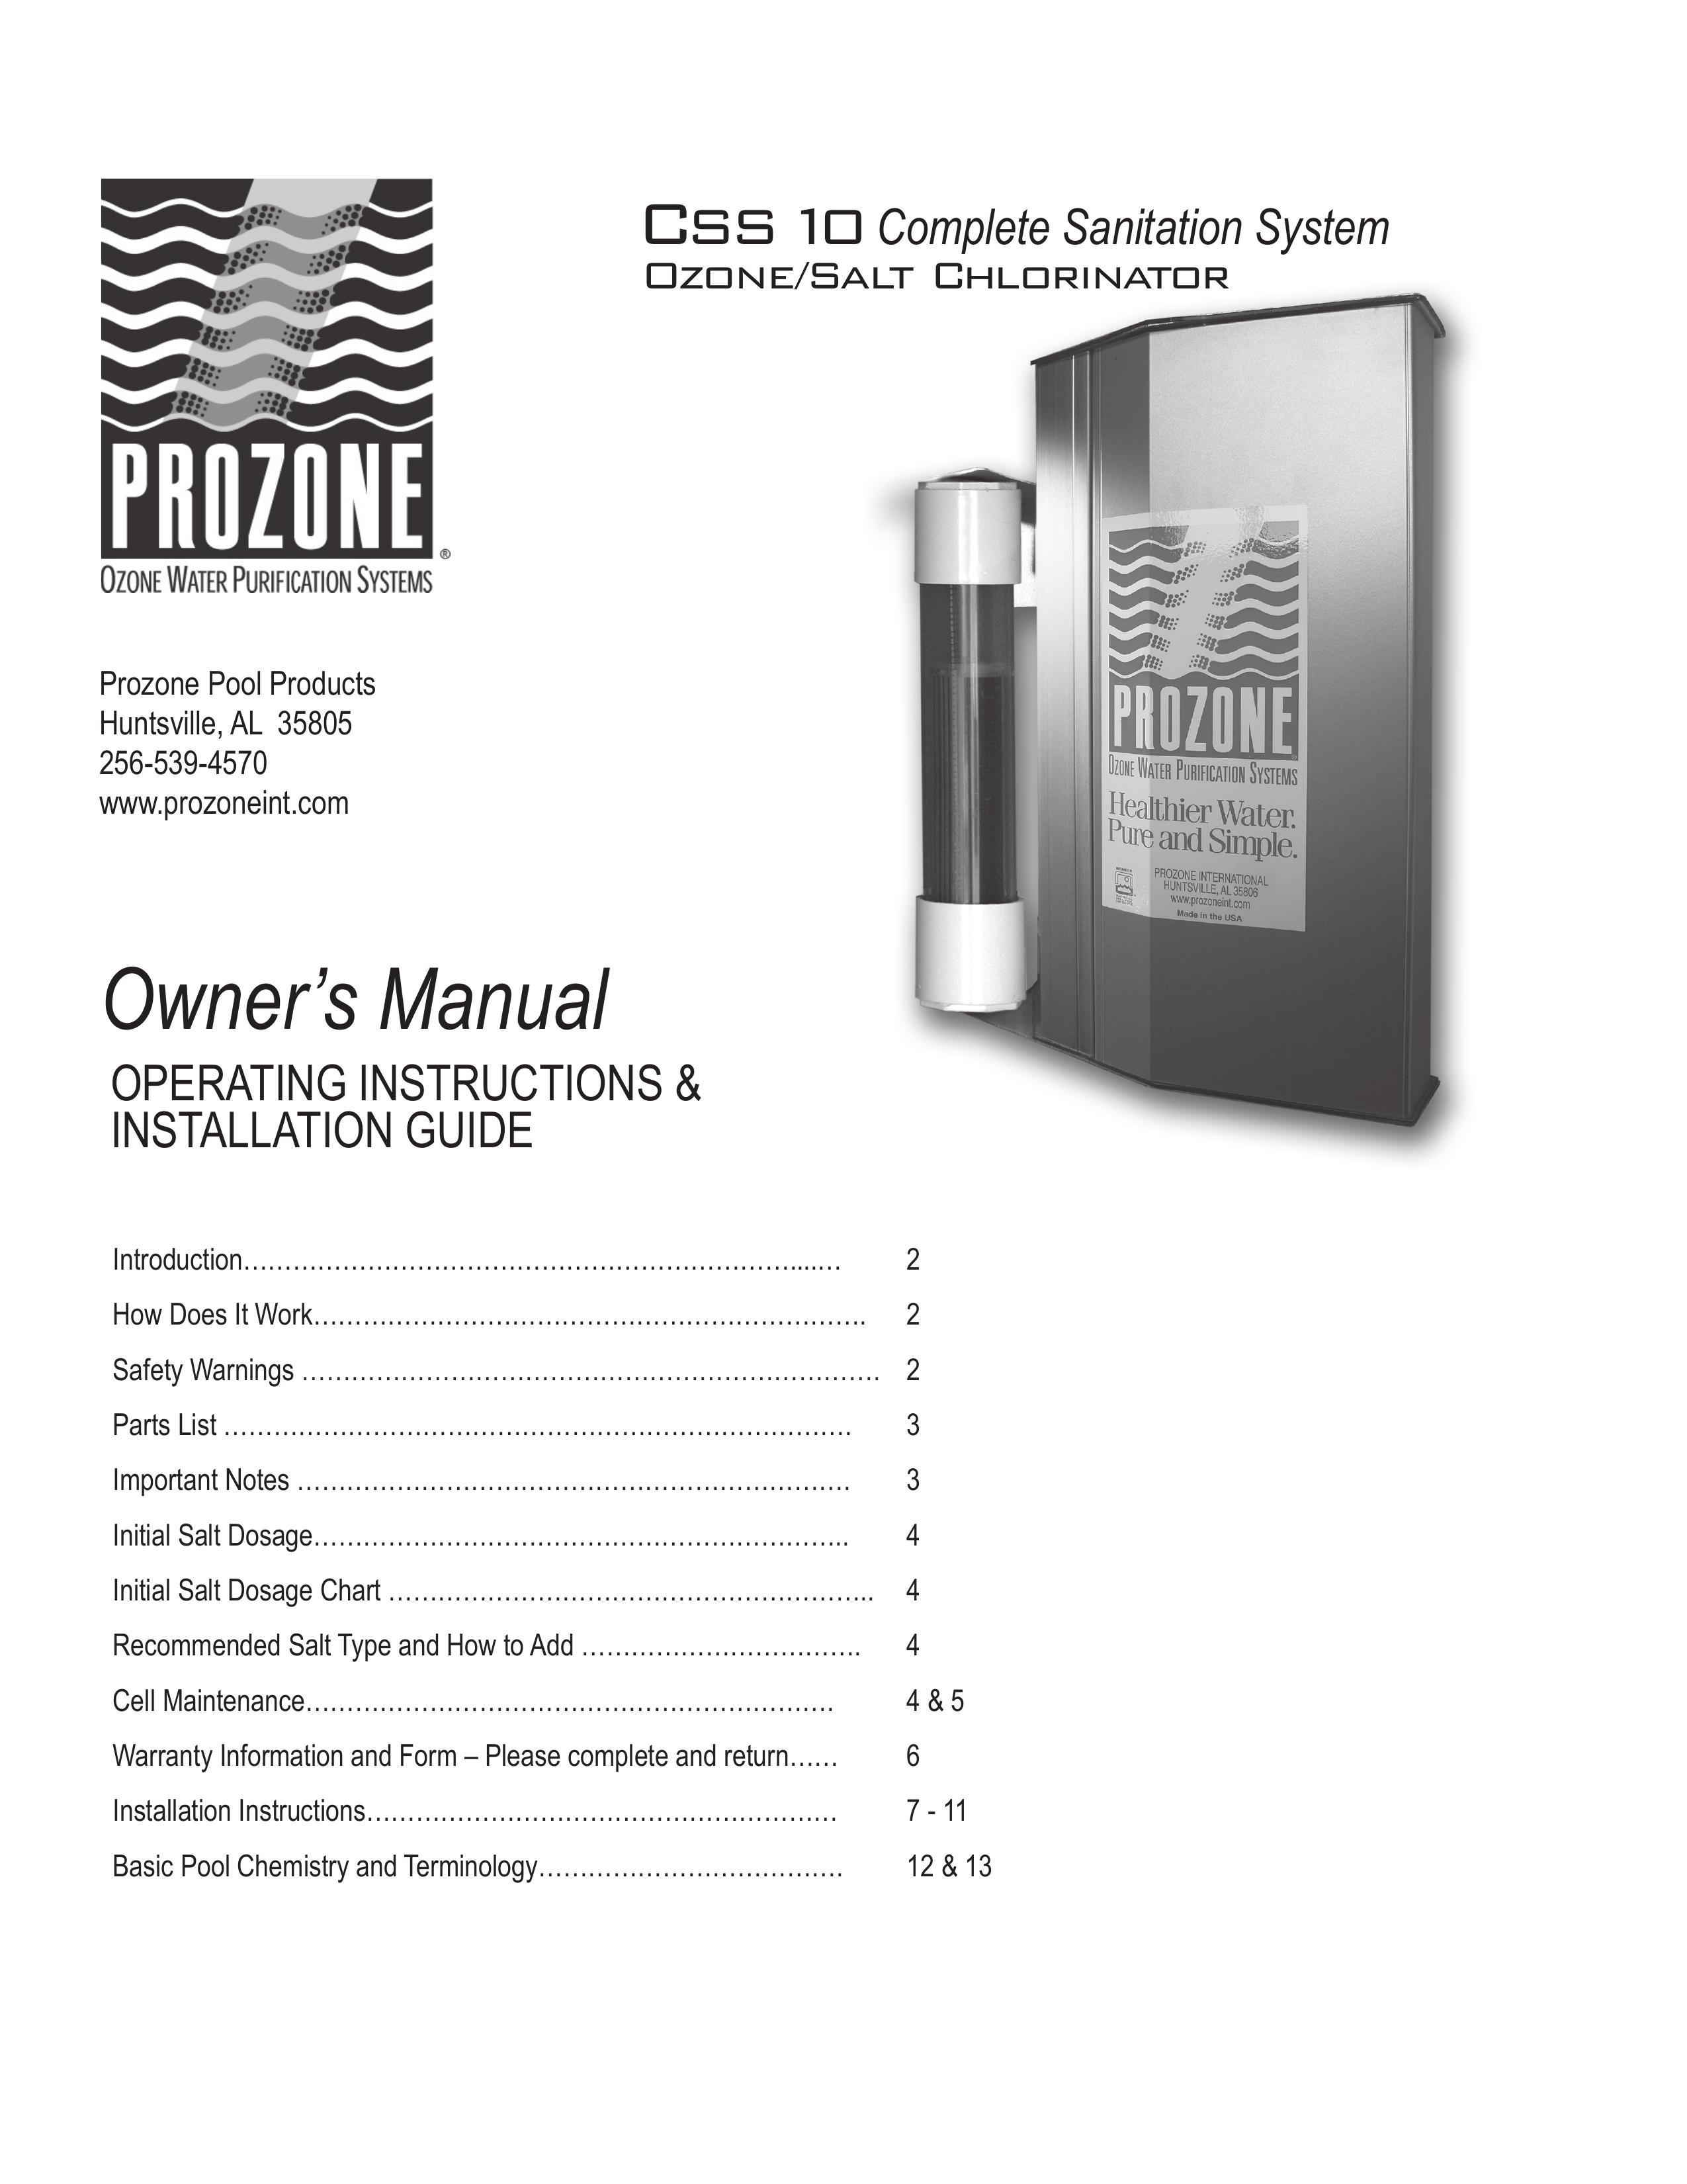 Prozone Pool Products CSS10 Swimming Pool Filter User Manual